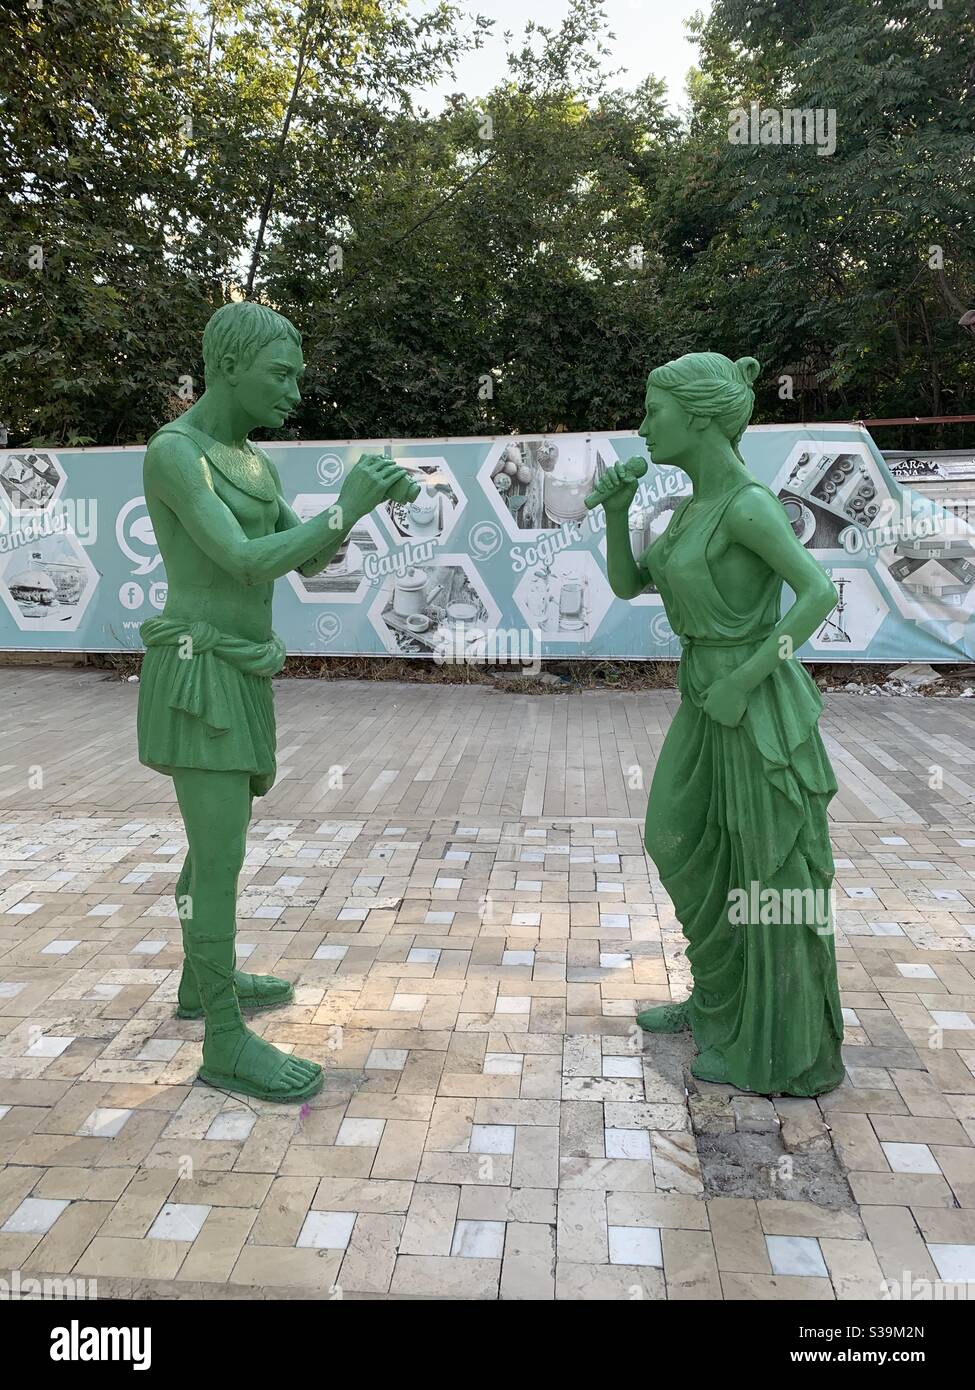 Two green statues of a man filming a woman singing Stock Photo